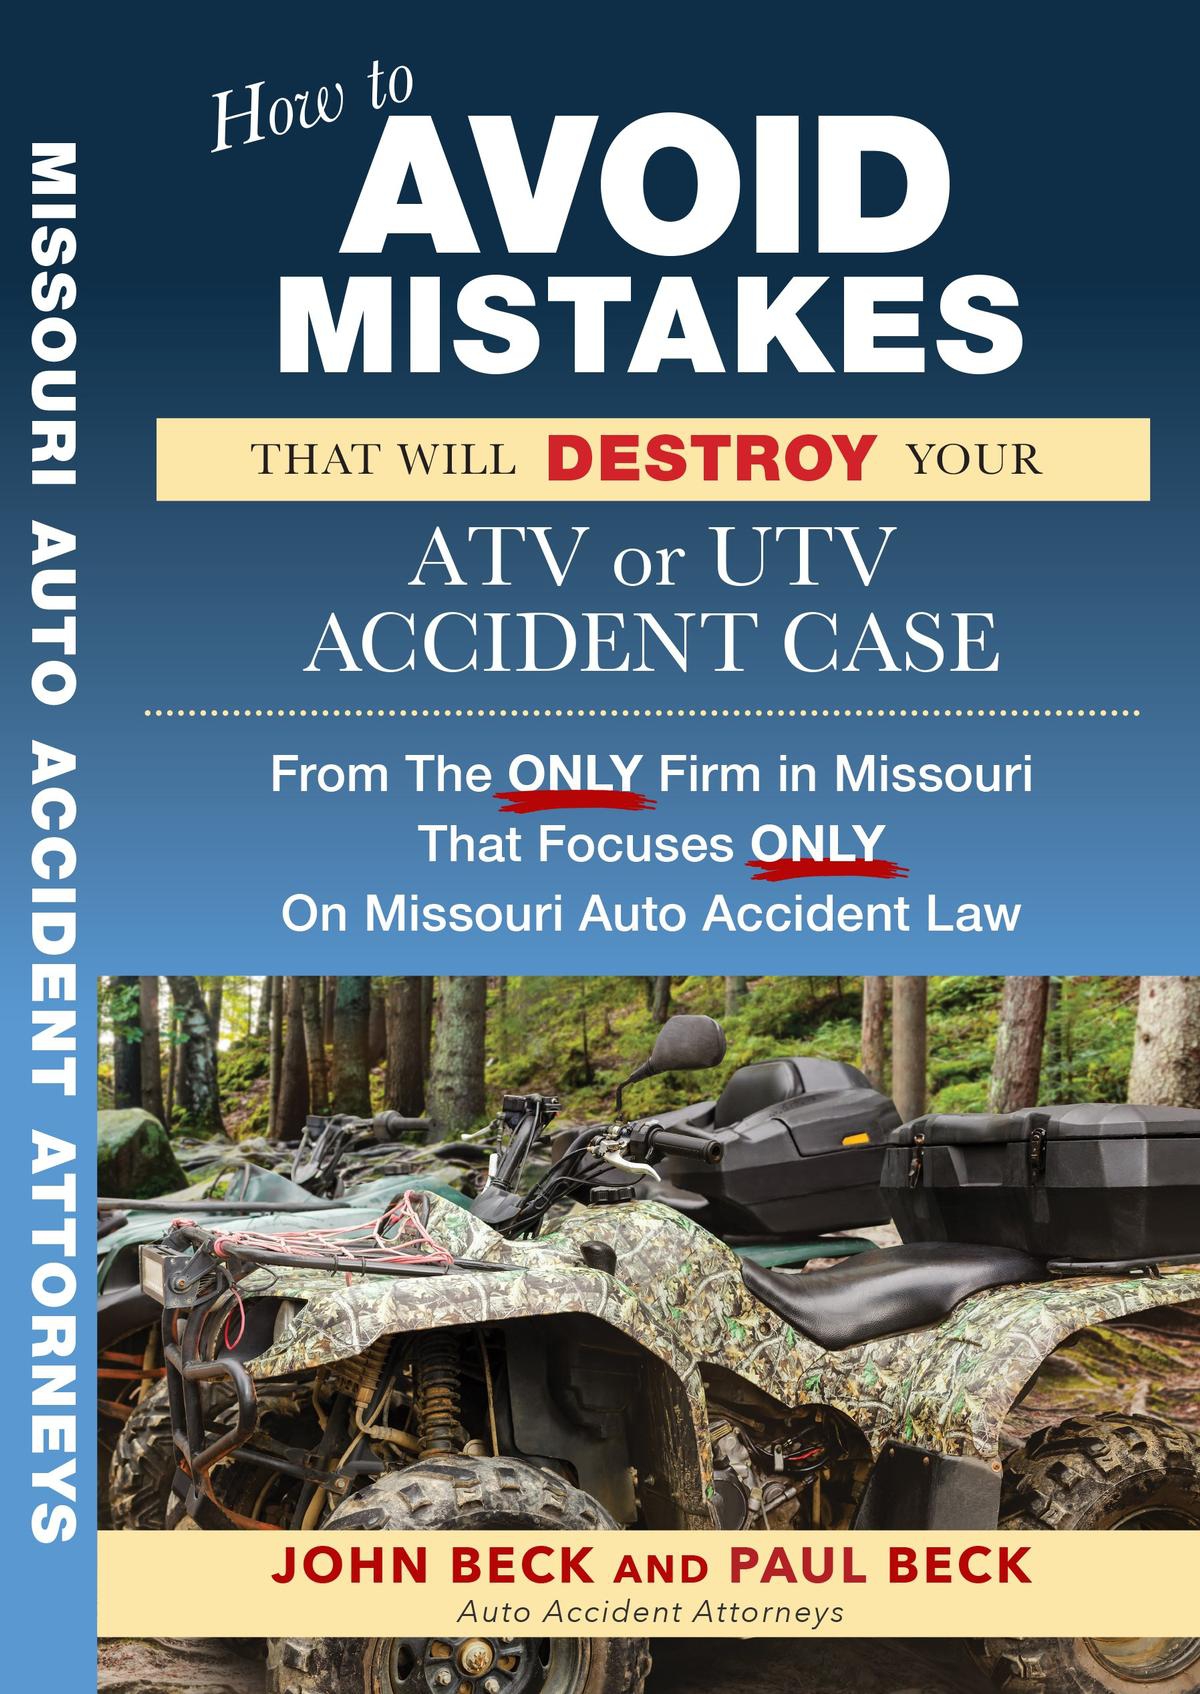 How to Avoid Mistakes That Will Destroy Your ATV or UTV Accident Case